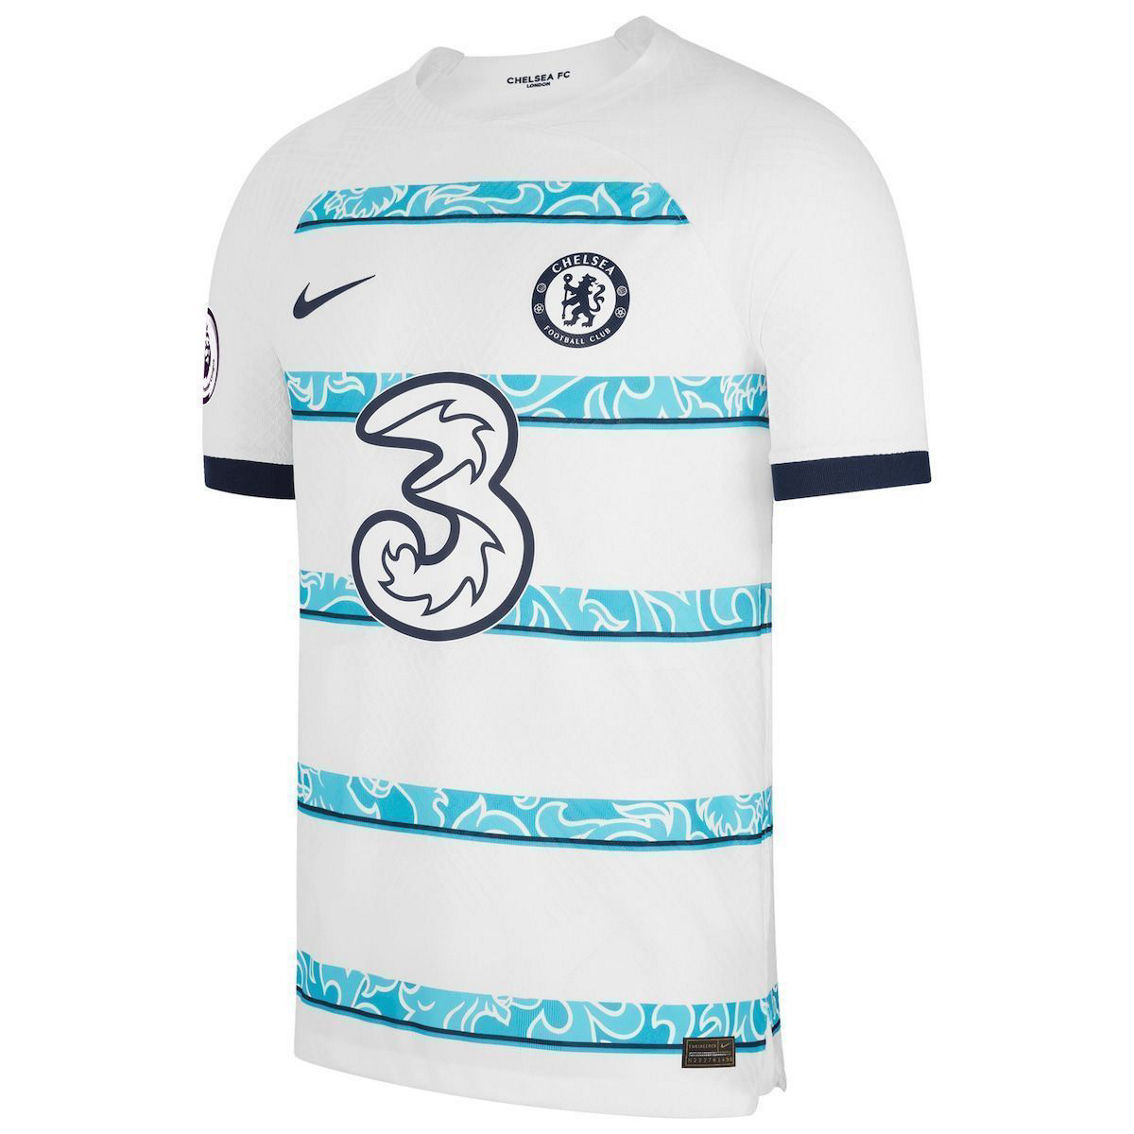 Nike Men's White Chelsea 2022/23 Away Vapor Match Authentic Blank Jersey - Image 3 of 4